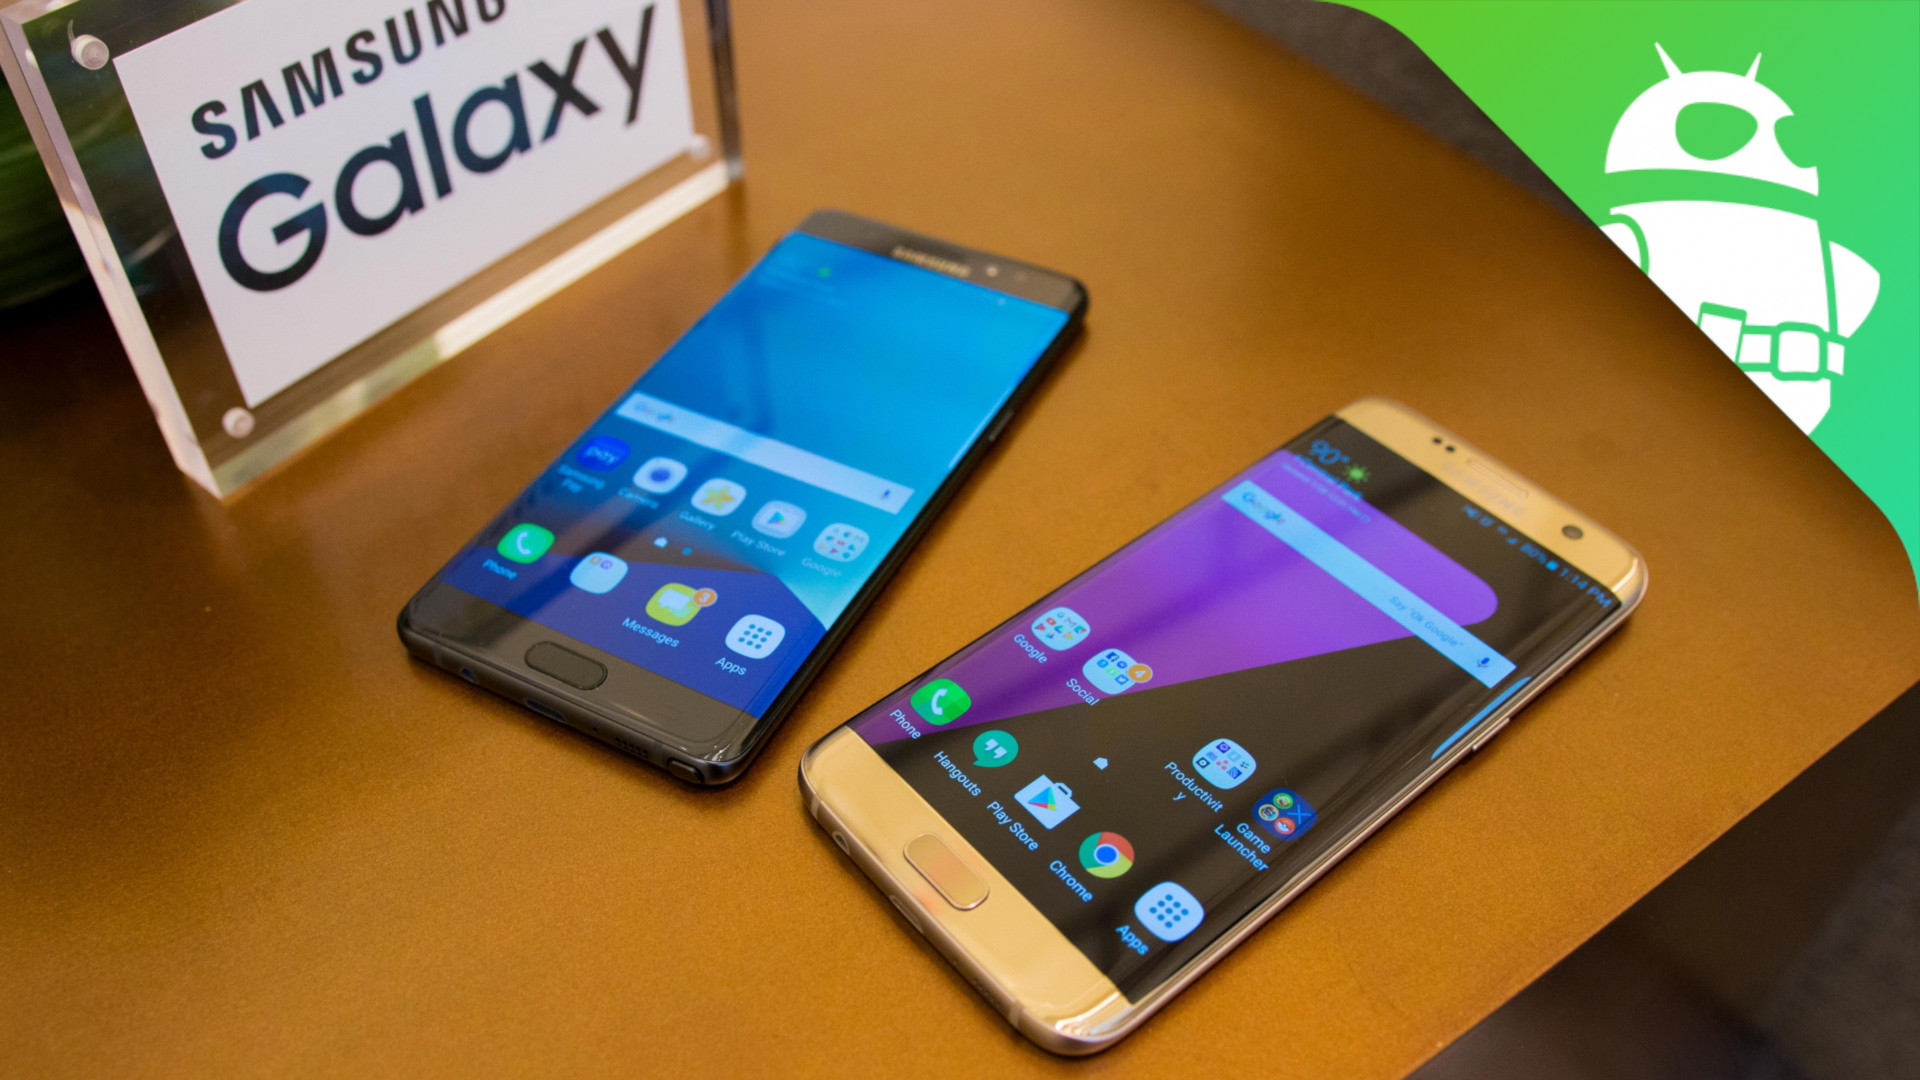 Samsung Galaxy Note 7 vs Galaxy Edge First Look - Android Authority